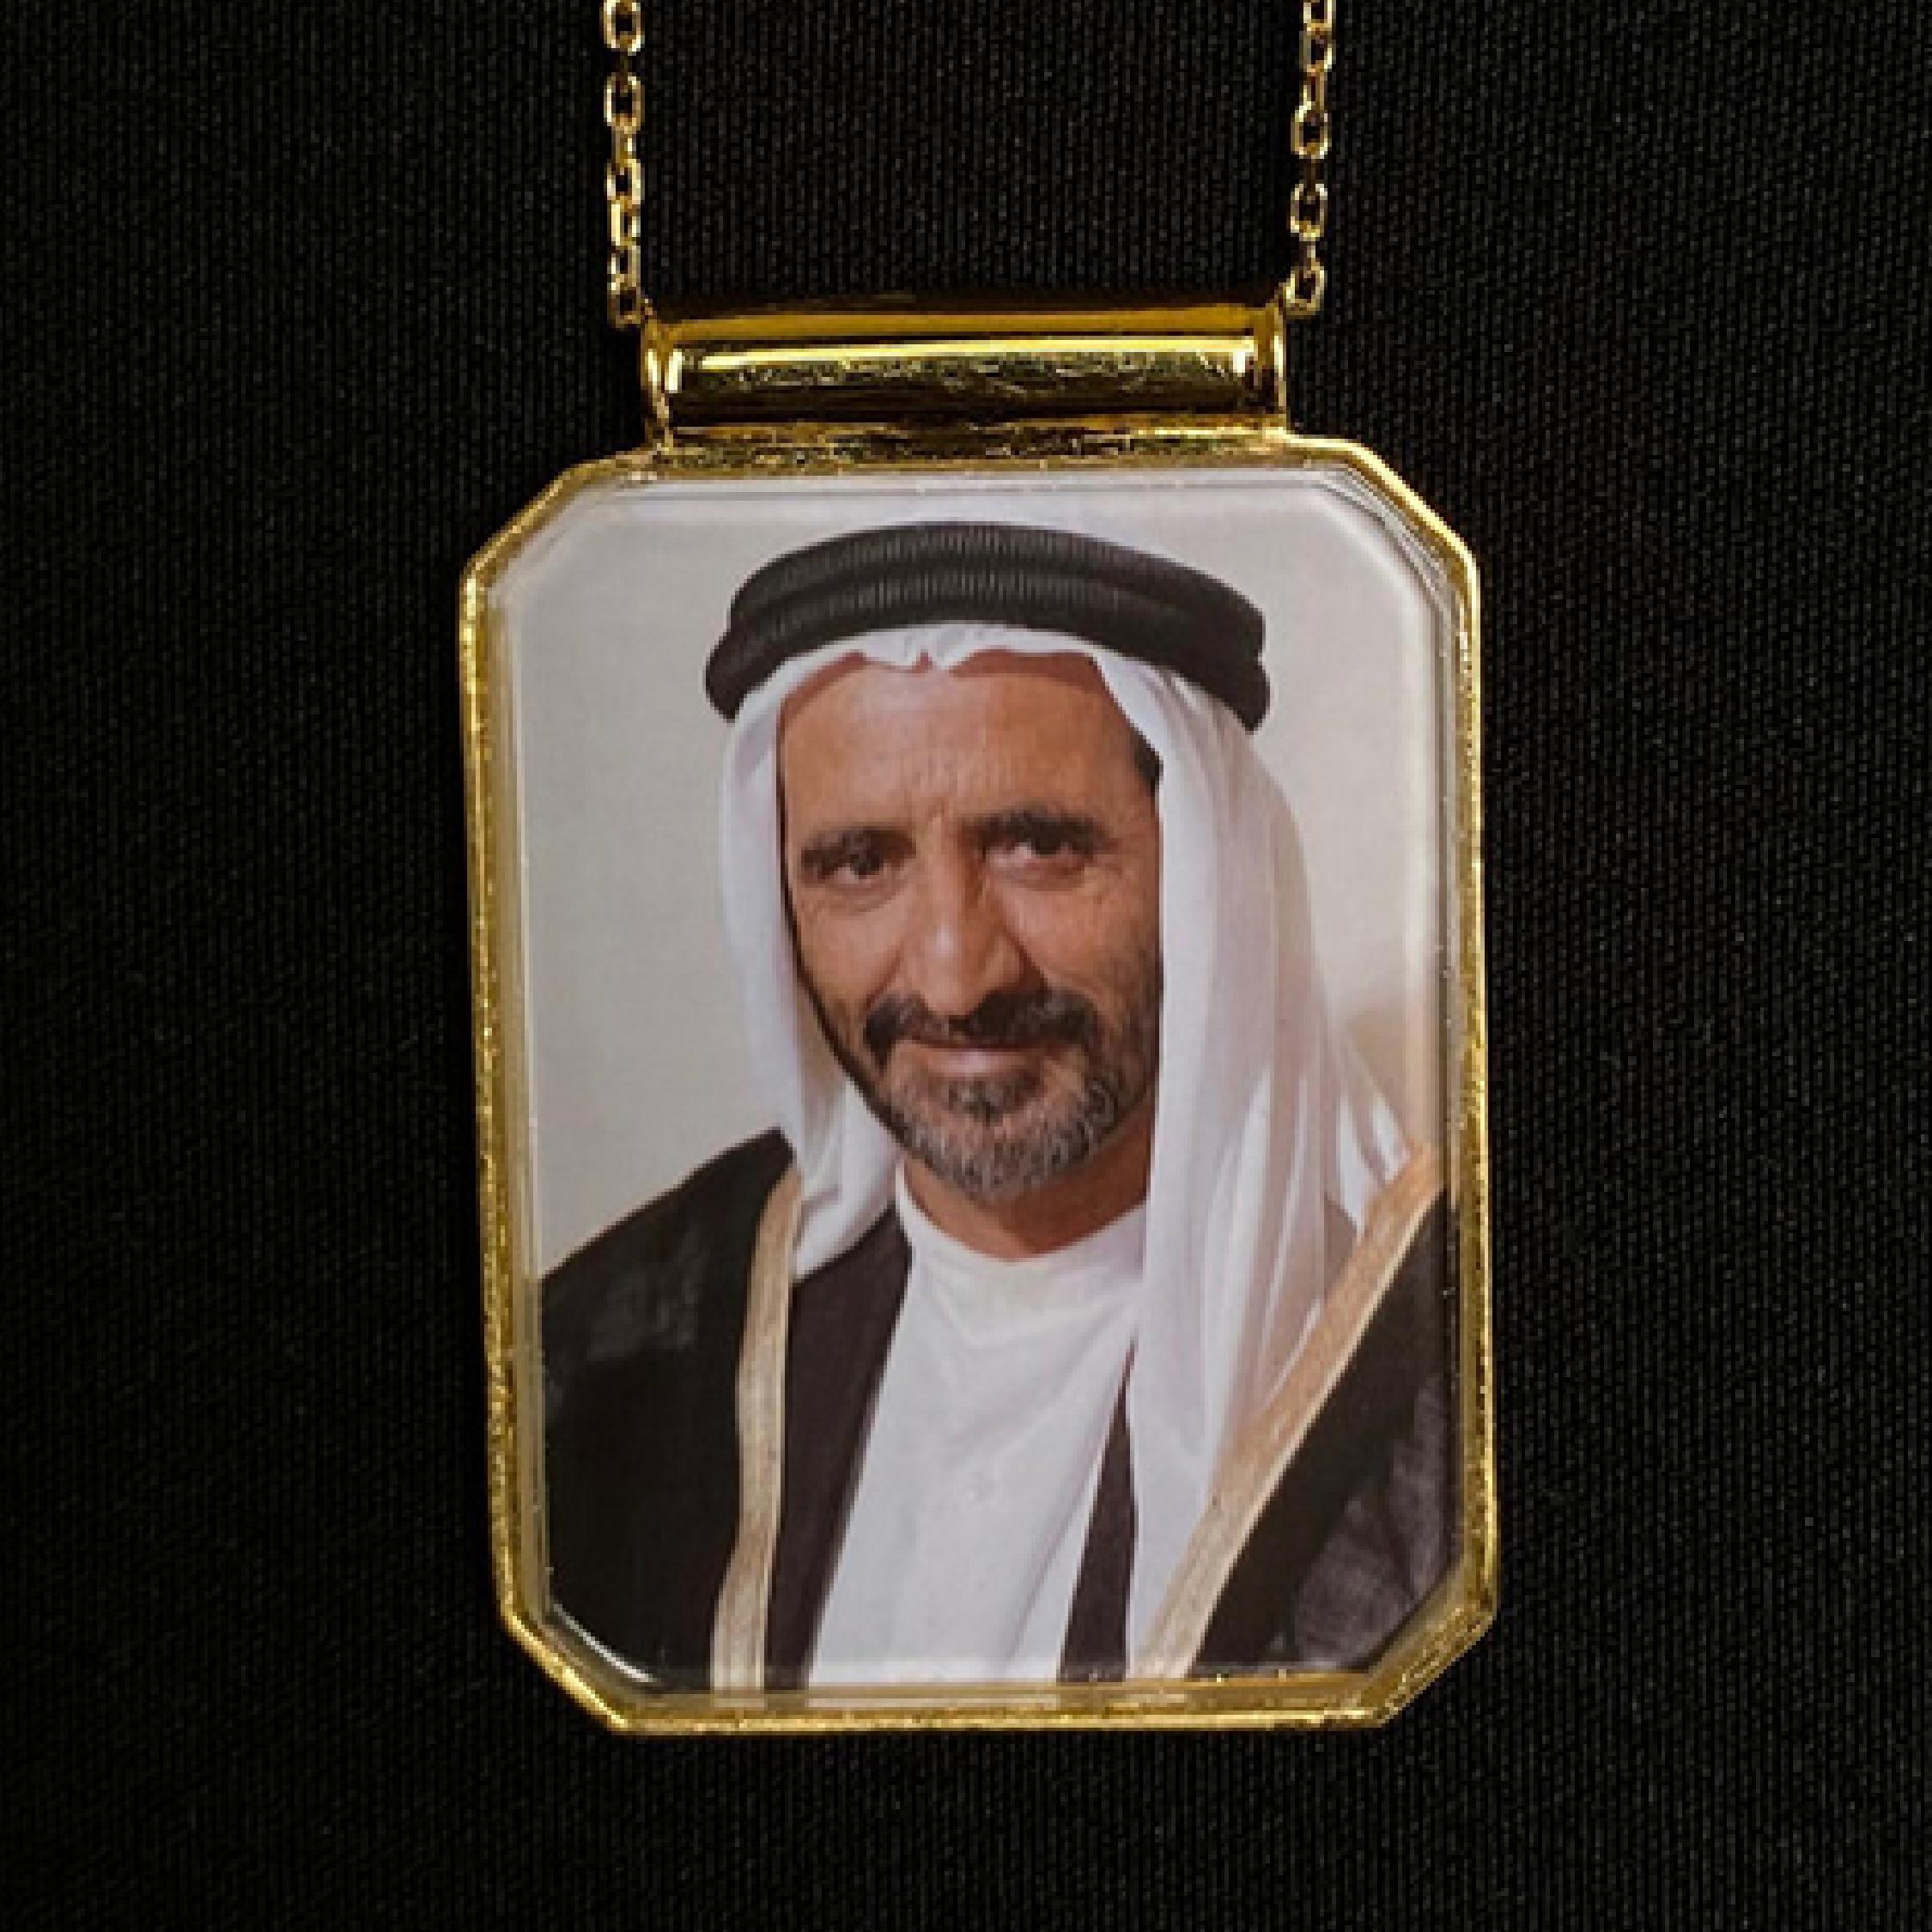 An undisputed pioneer and beloved leader of Dubai, Sheikh Rashid is recognized for his instrumental role in the union of the seven Emirates and his tireless dedication to shaping Dubai into the vibrant city it is today. As a symbol of admiration for